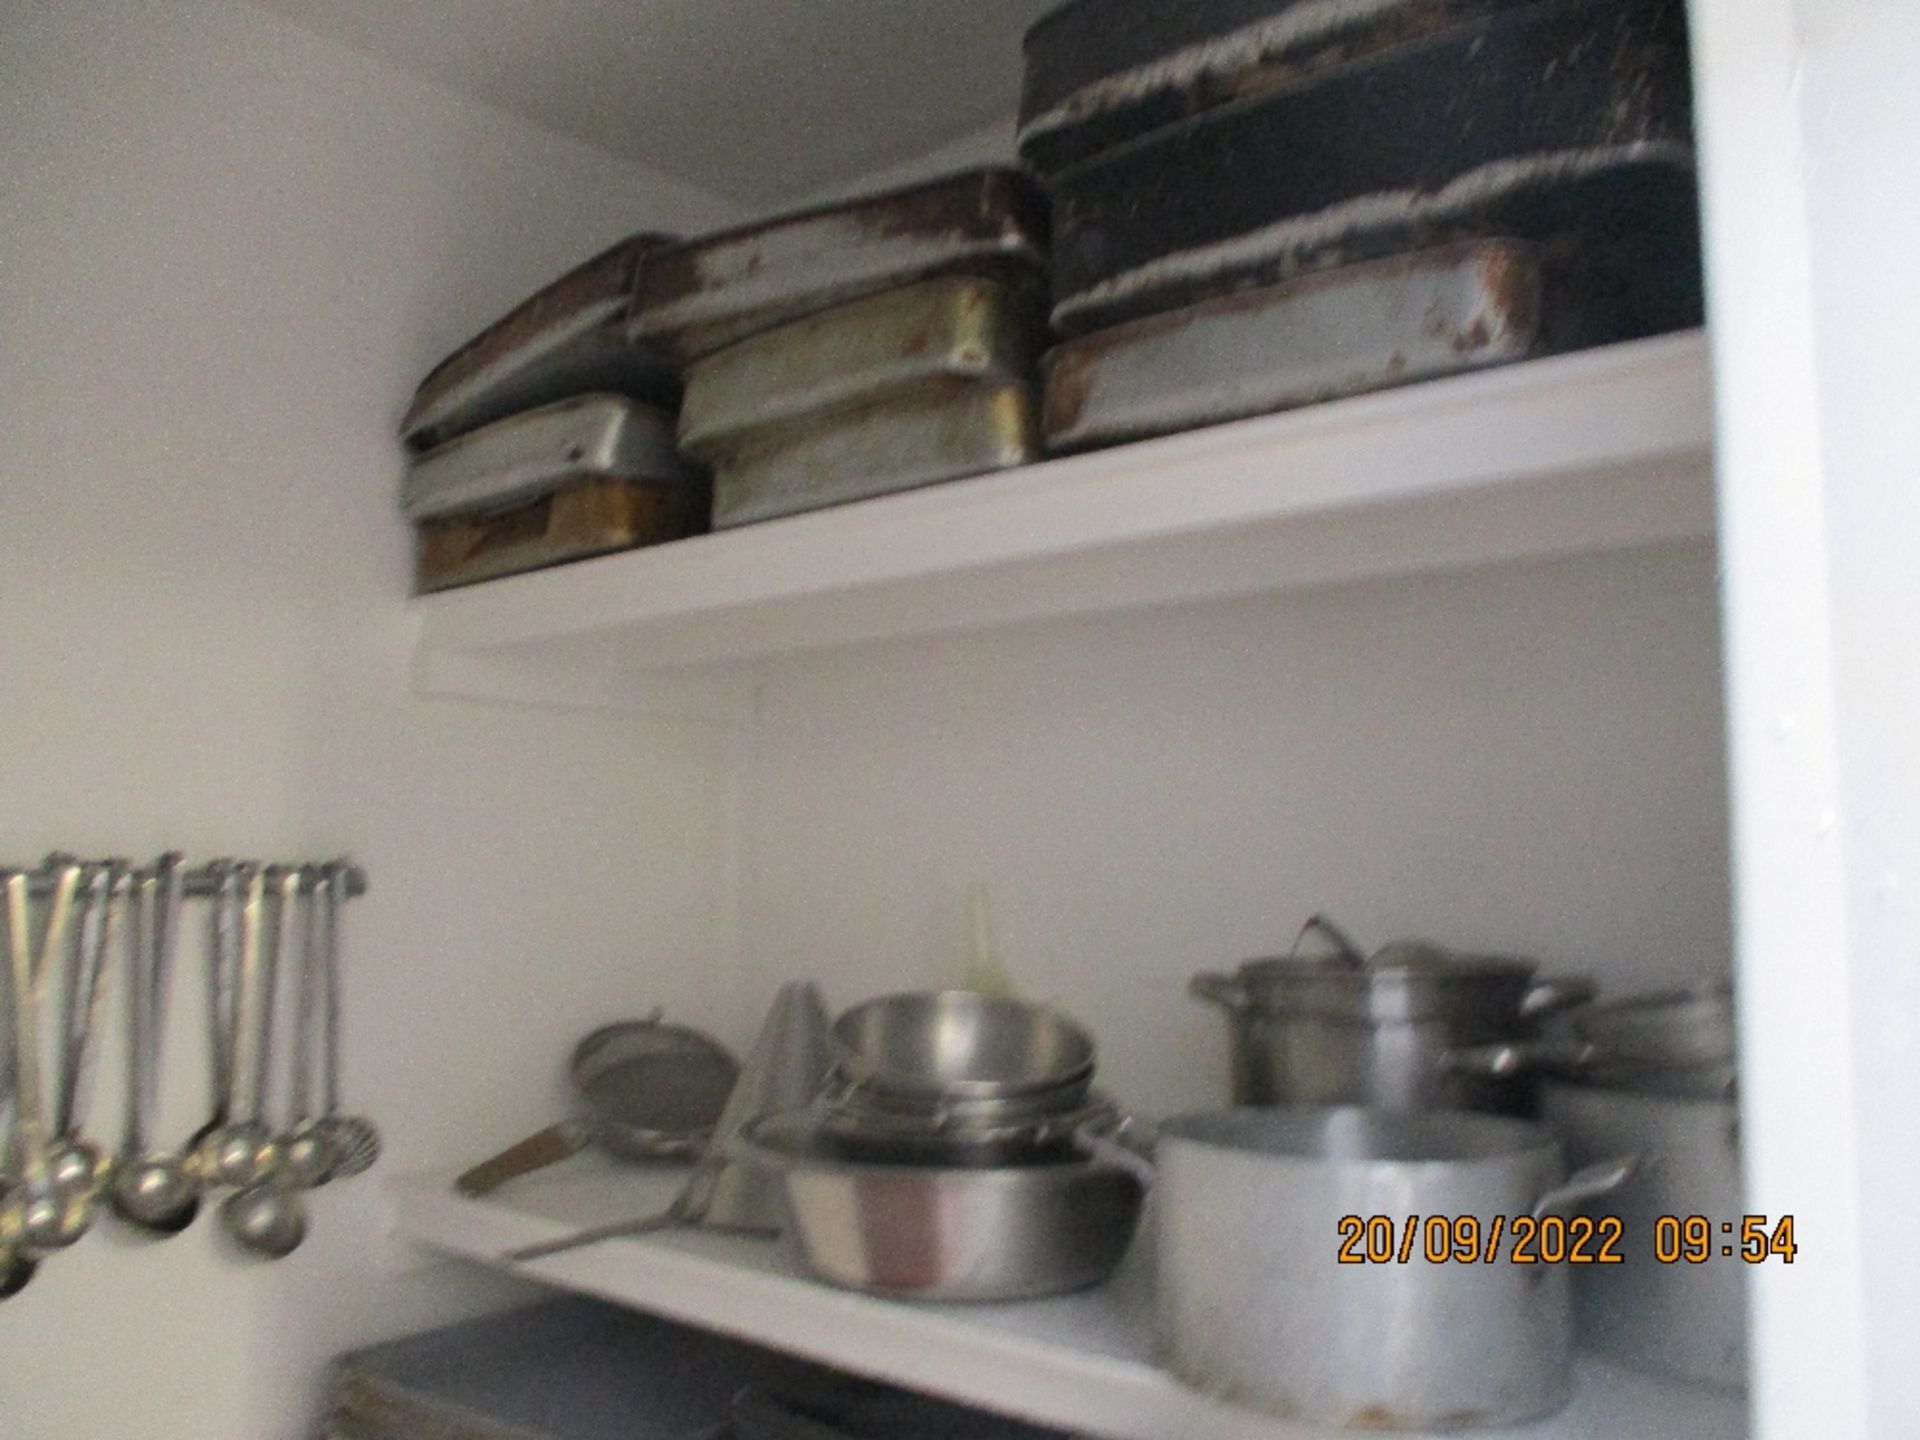 Contents of Cookware - Image 2 of 5